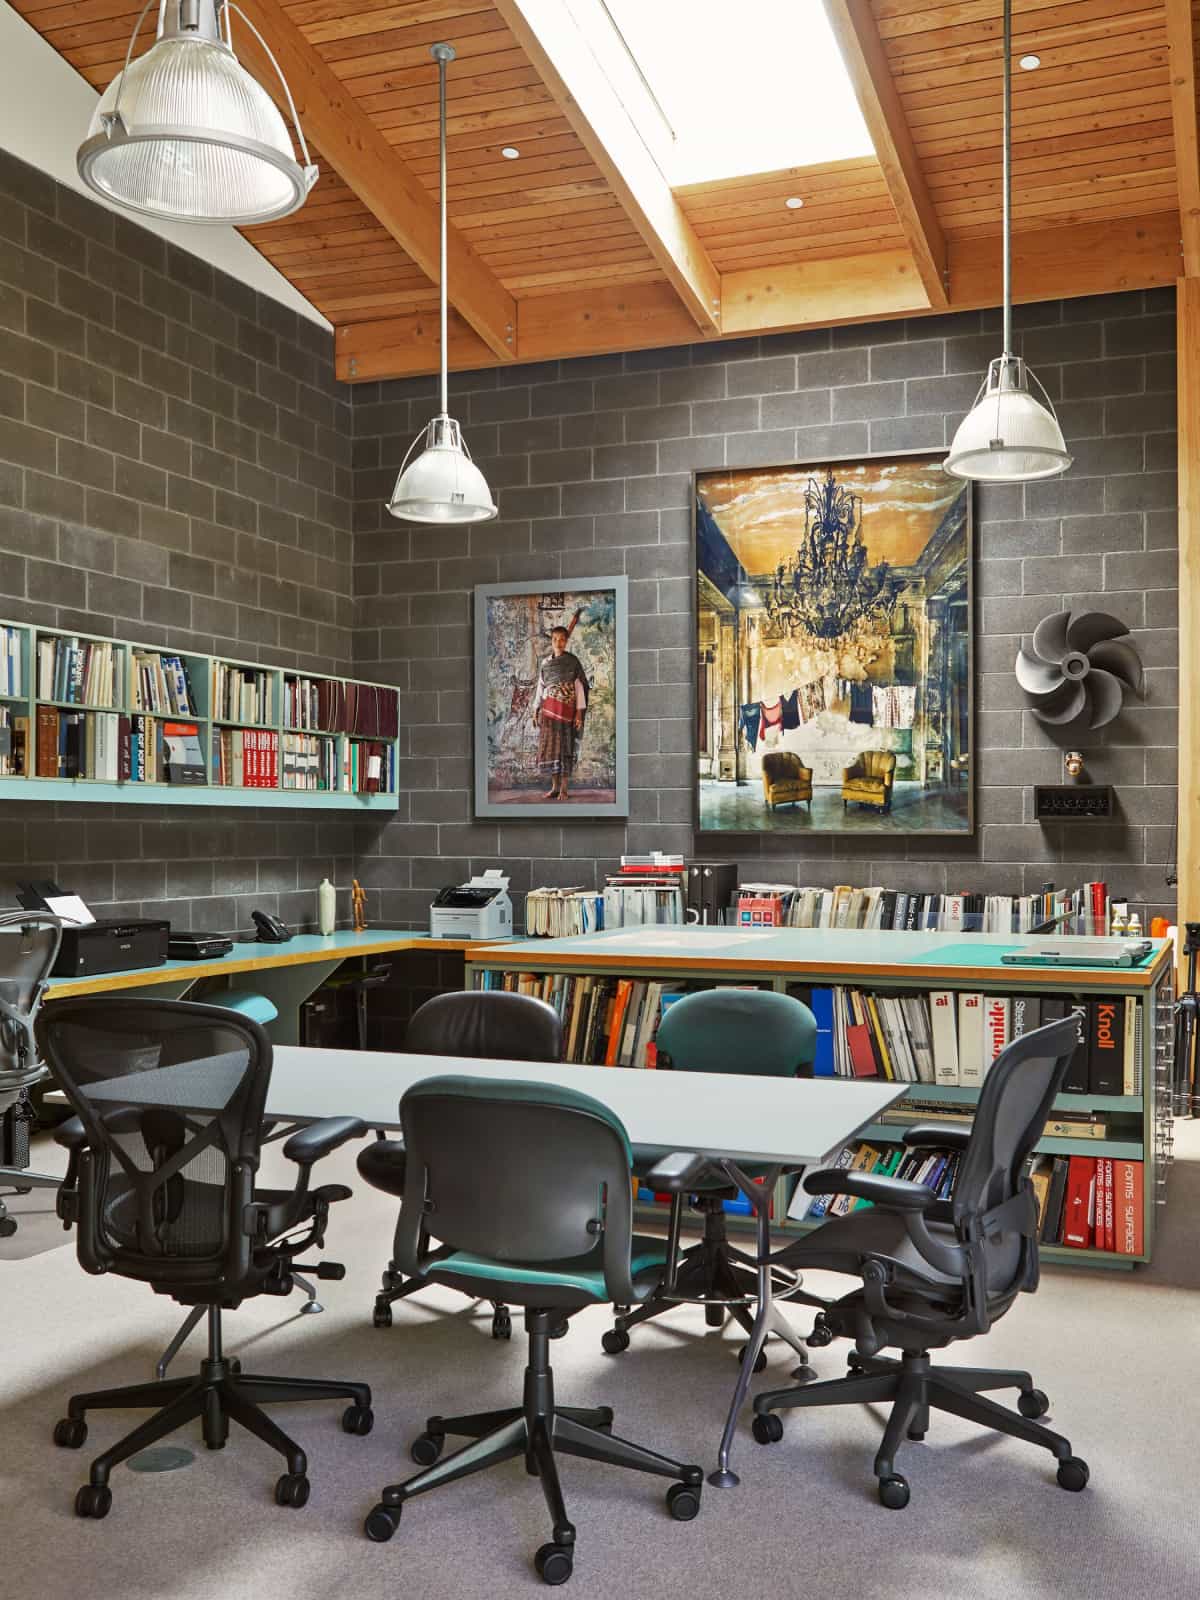 Don Chadwick's industrial-style LA studio with dark brick walls and wood paneled ceiling. Featured are a small conference table and several dark gray and black Aeron and Equa Chairs, and overstuffed bookshelves nearby.